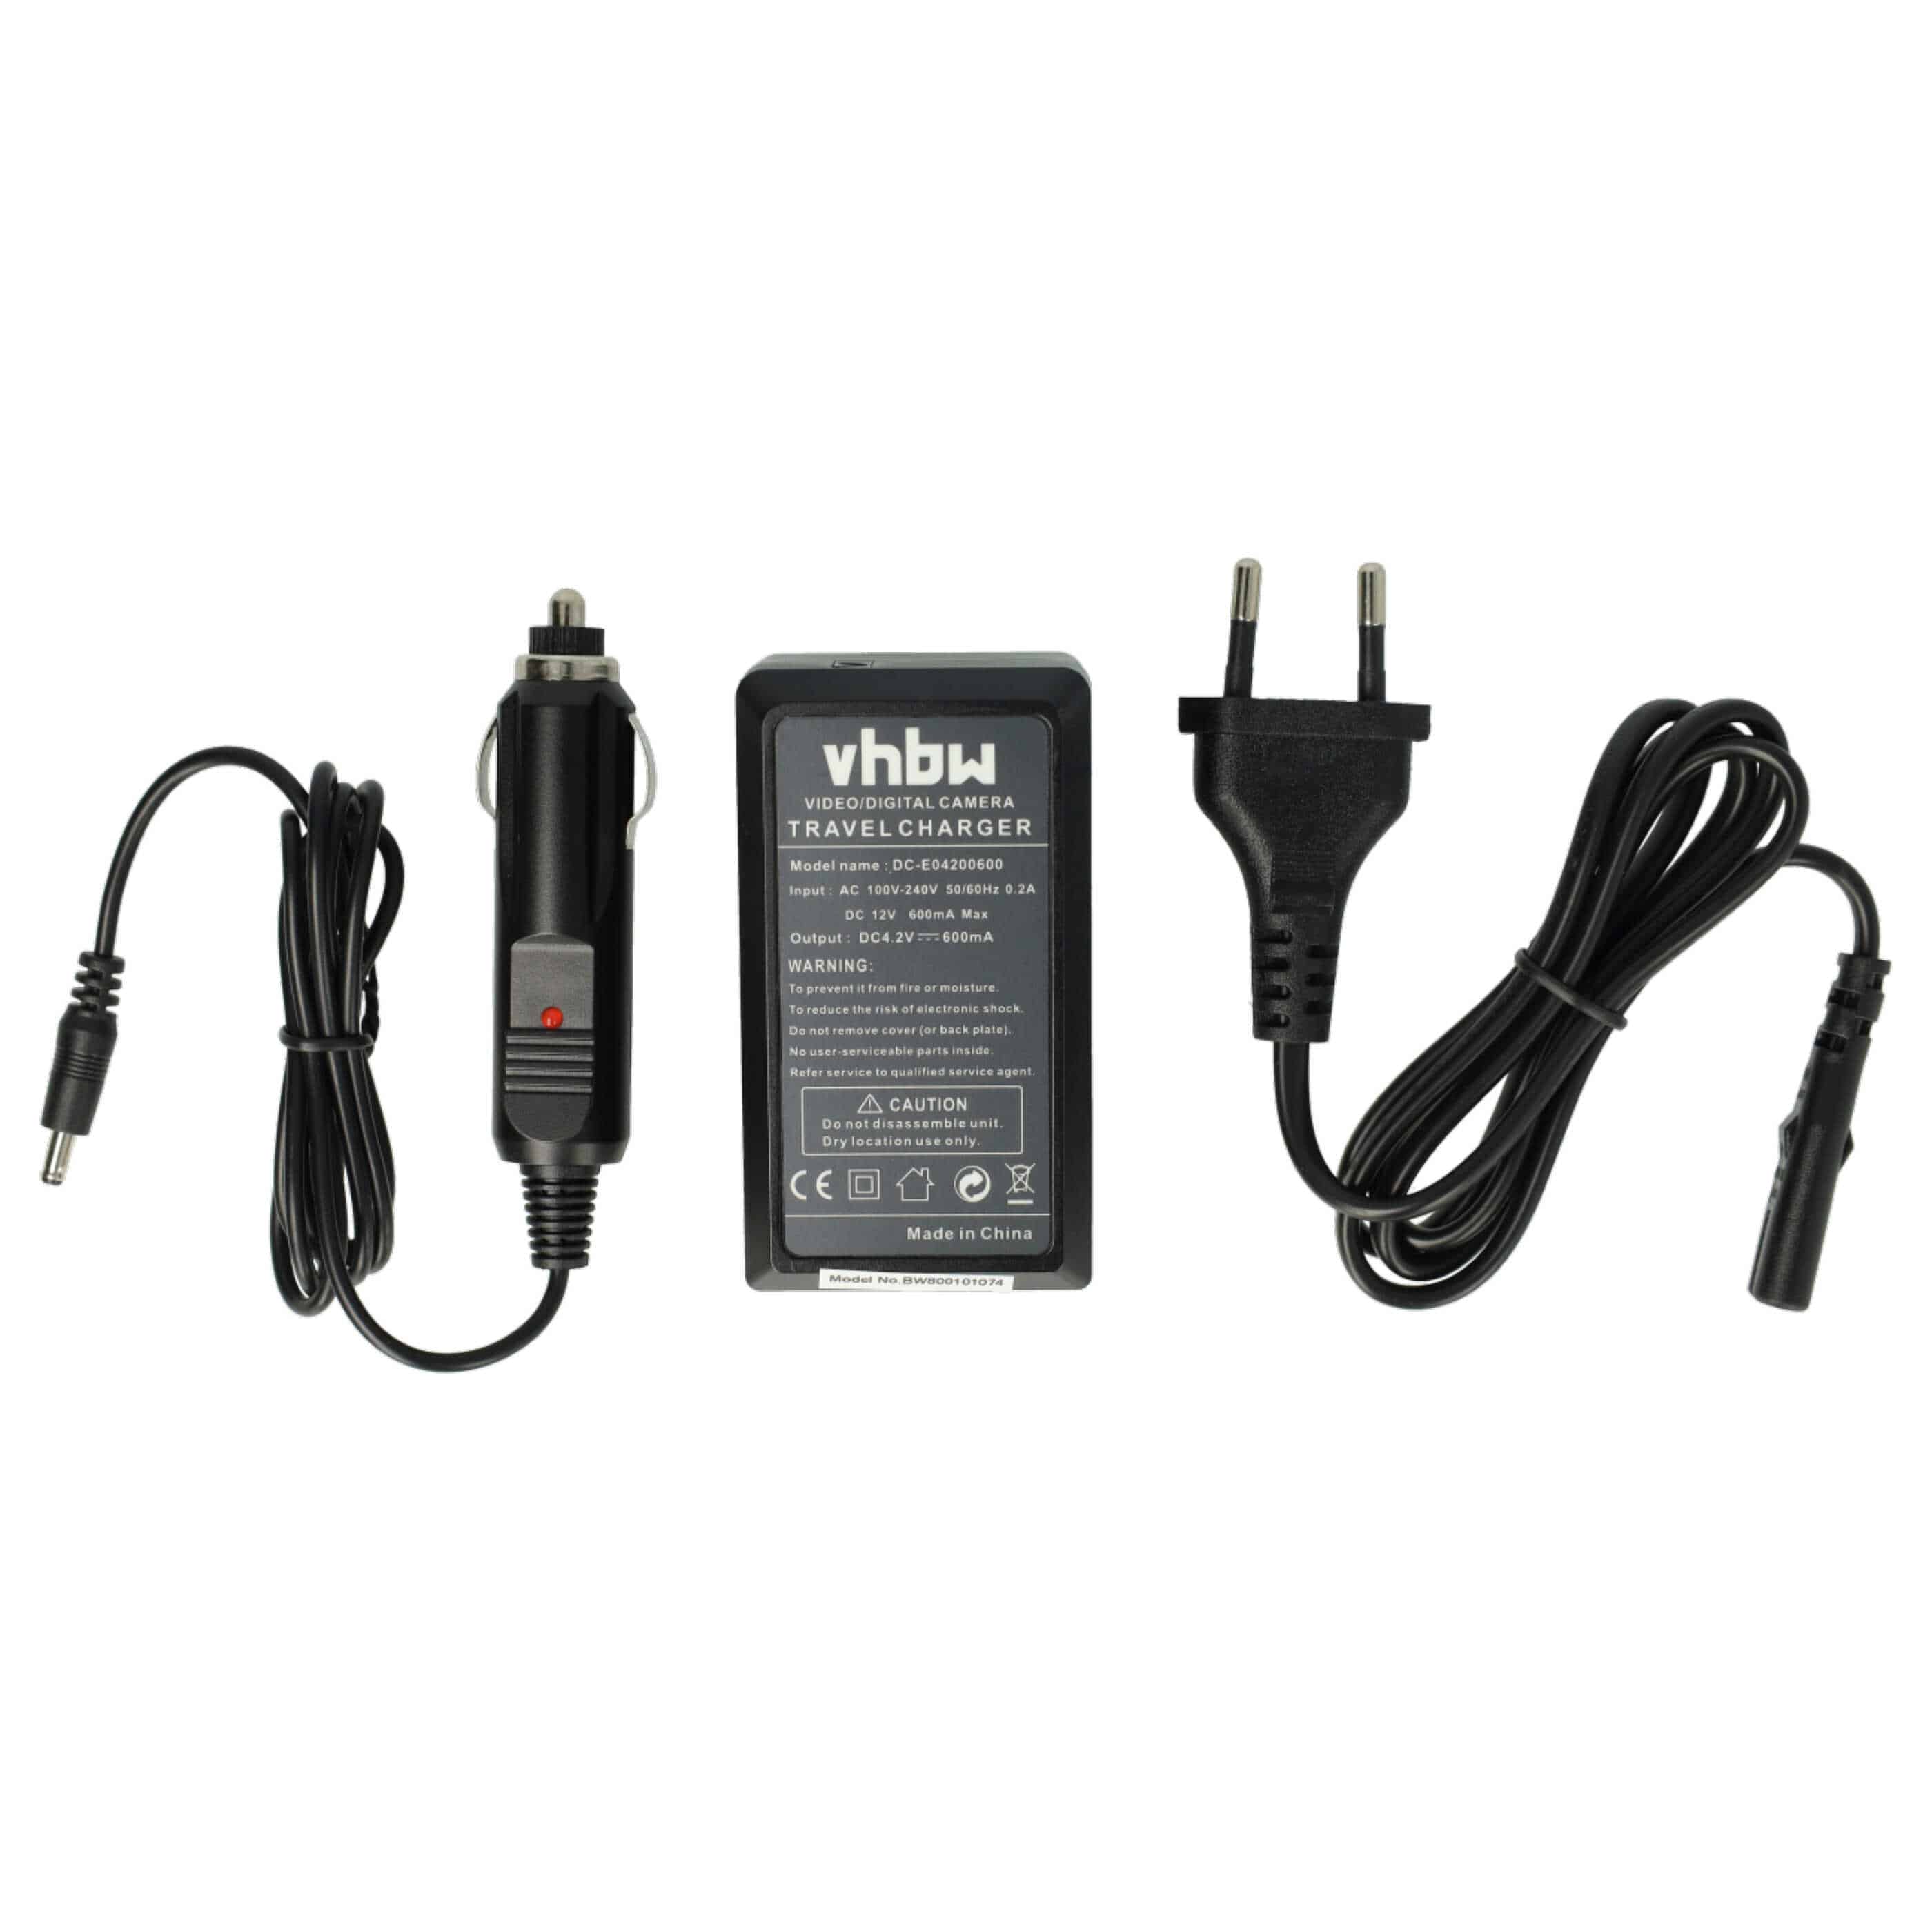 Battery Charger suitable for HX-DC2 Camera etc. - 0.6 A, 4.2 V